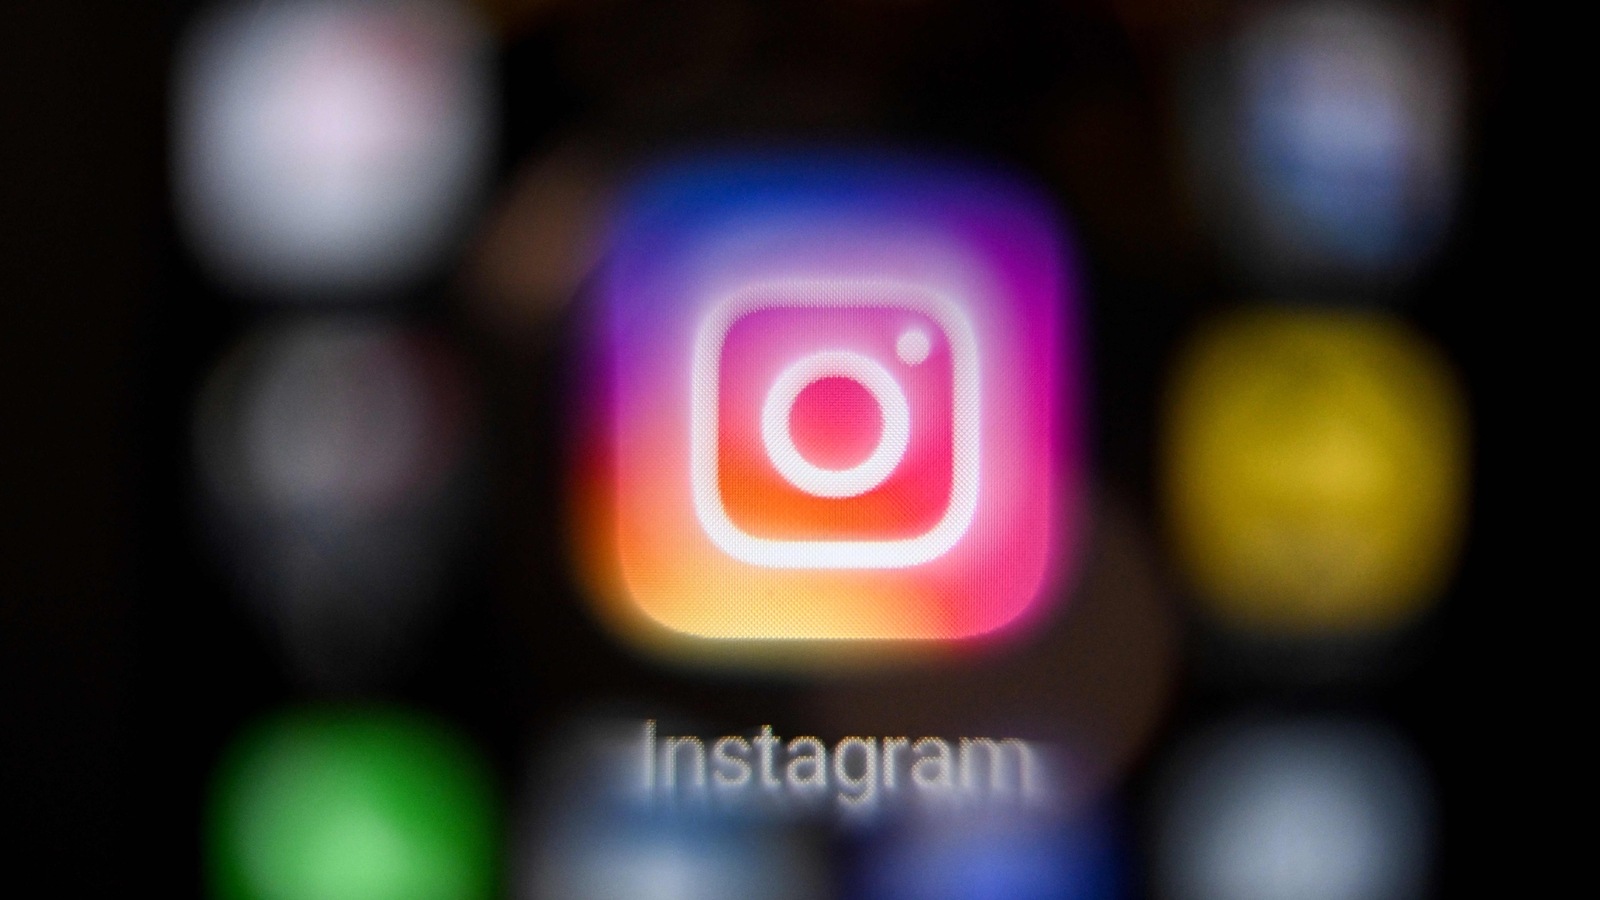 New Instagram messaging features rolled out; Useful for you? Find out ...